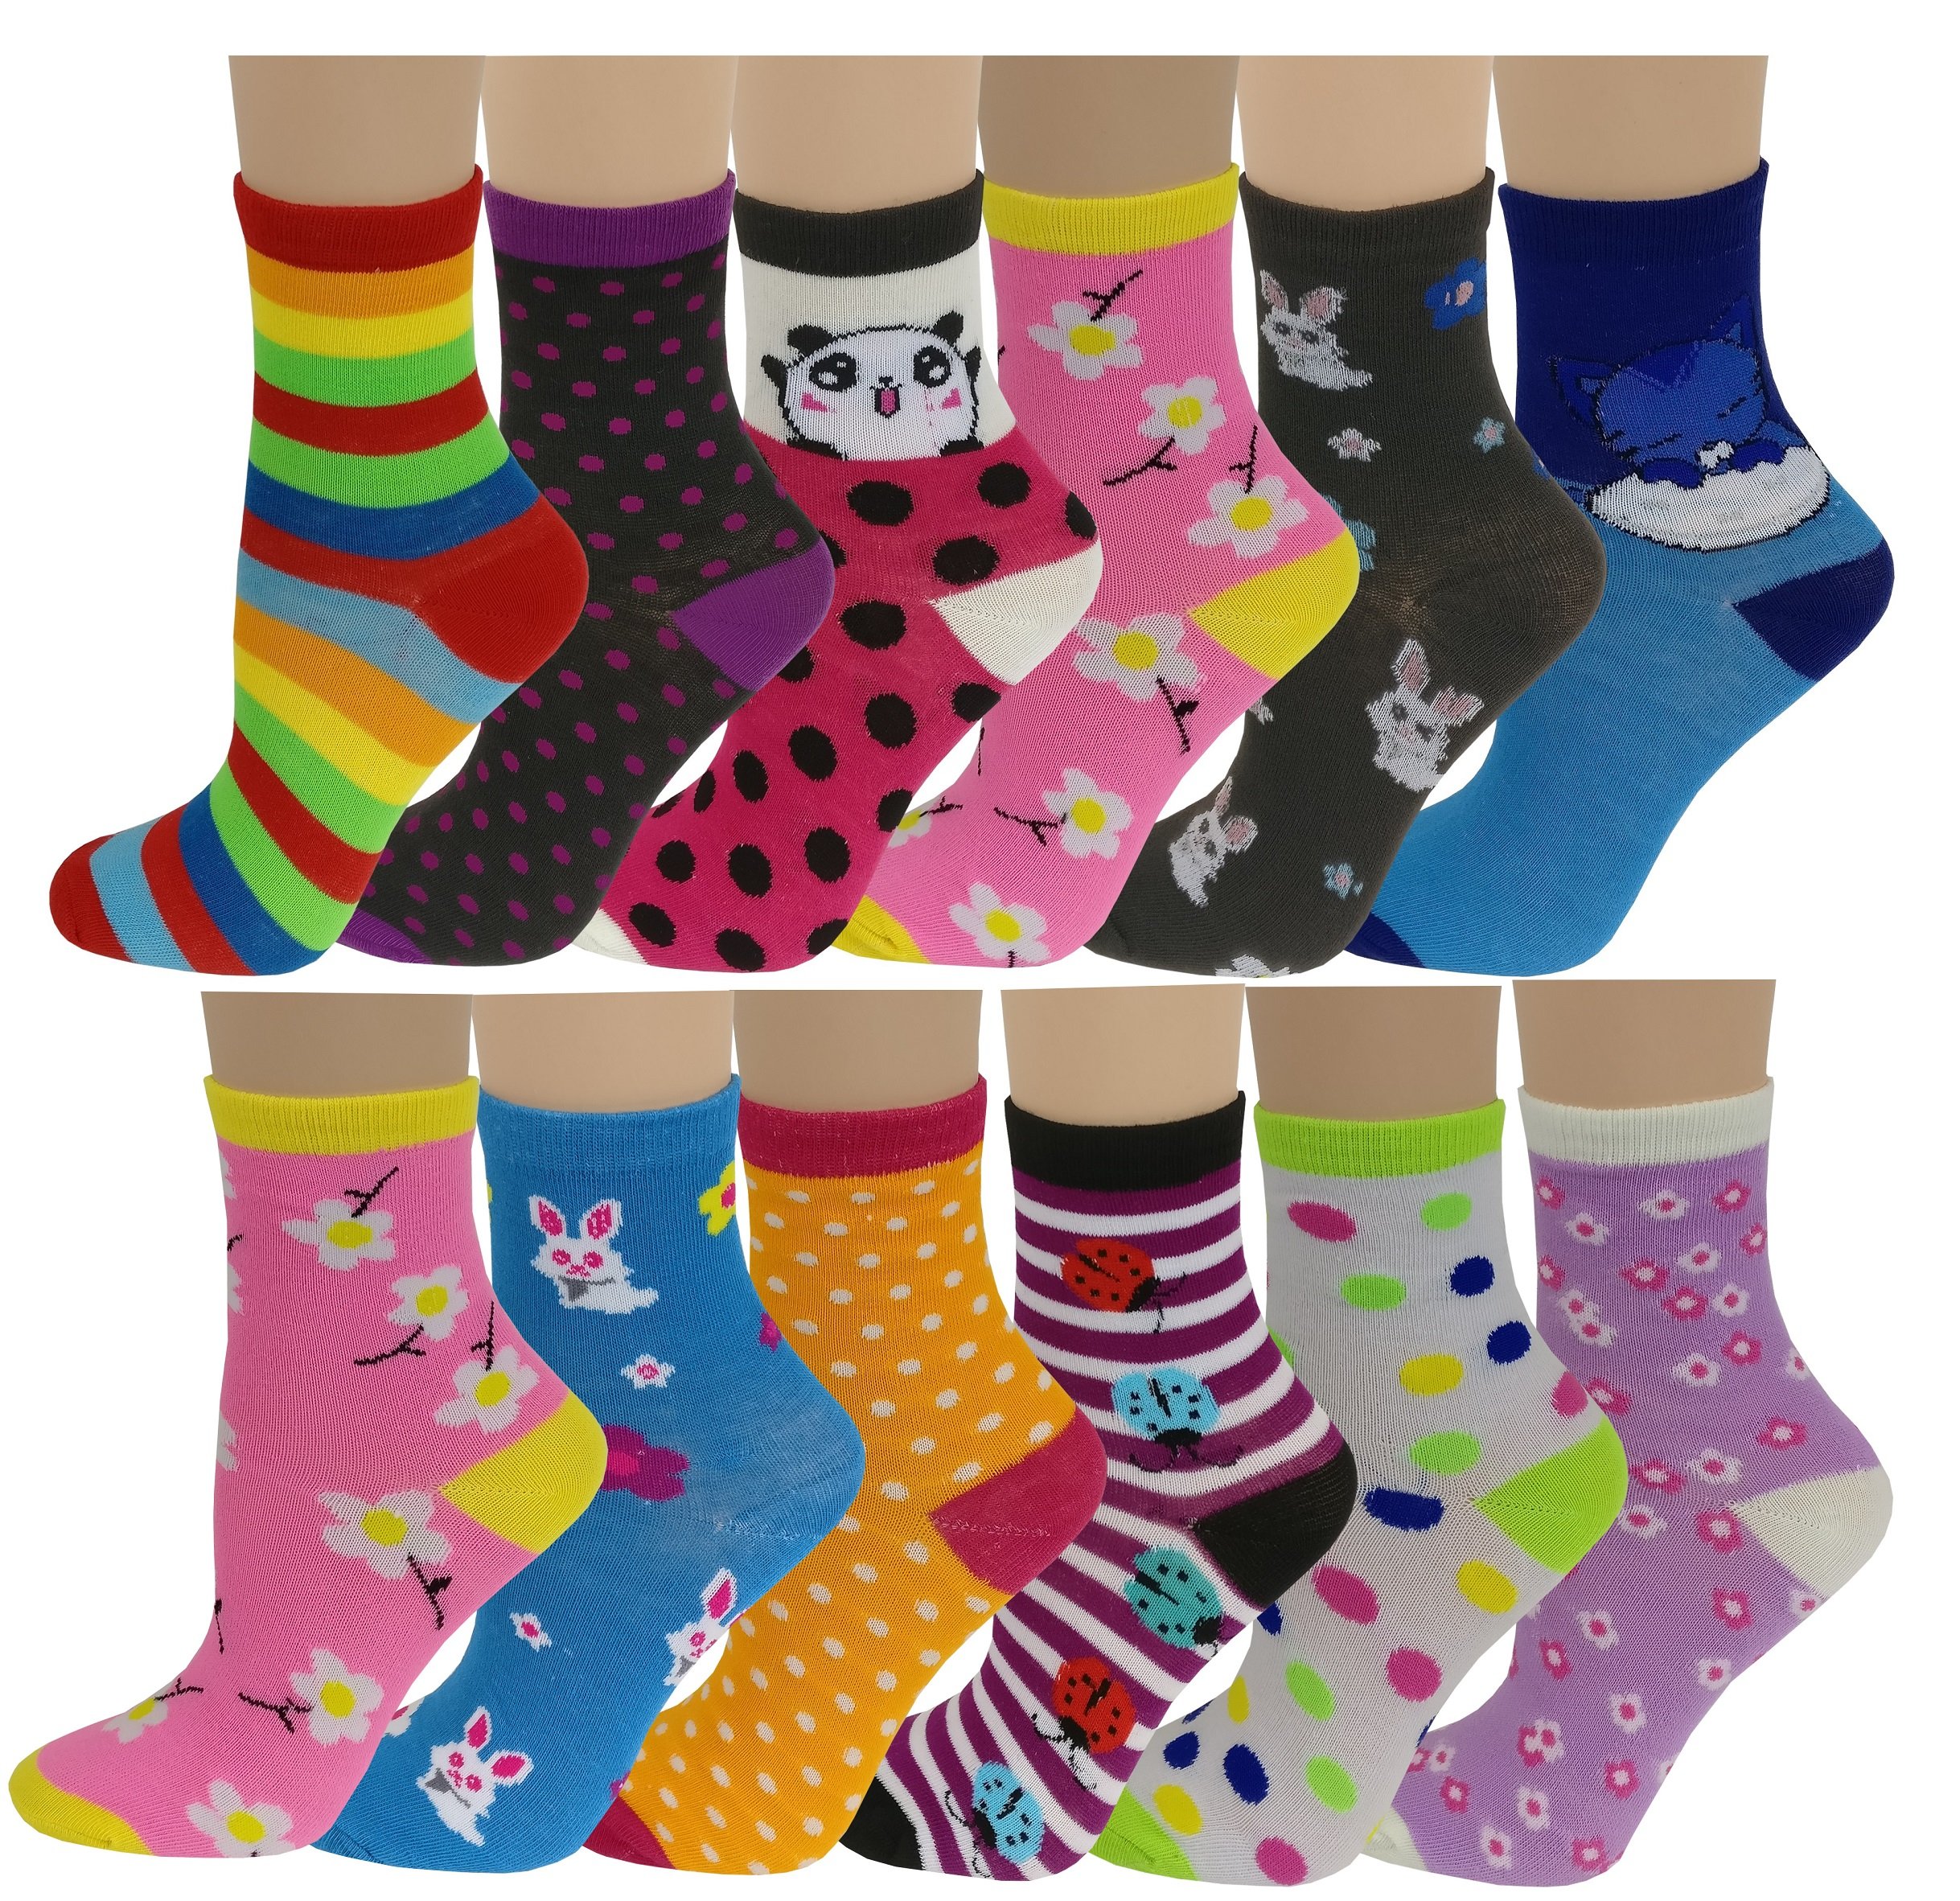 Different Touch 12 Pairs Pack Kids Girls Colorful Creative Fun Novelty Design Crew Socks